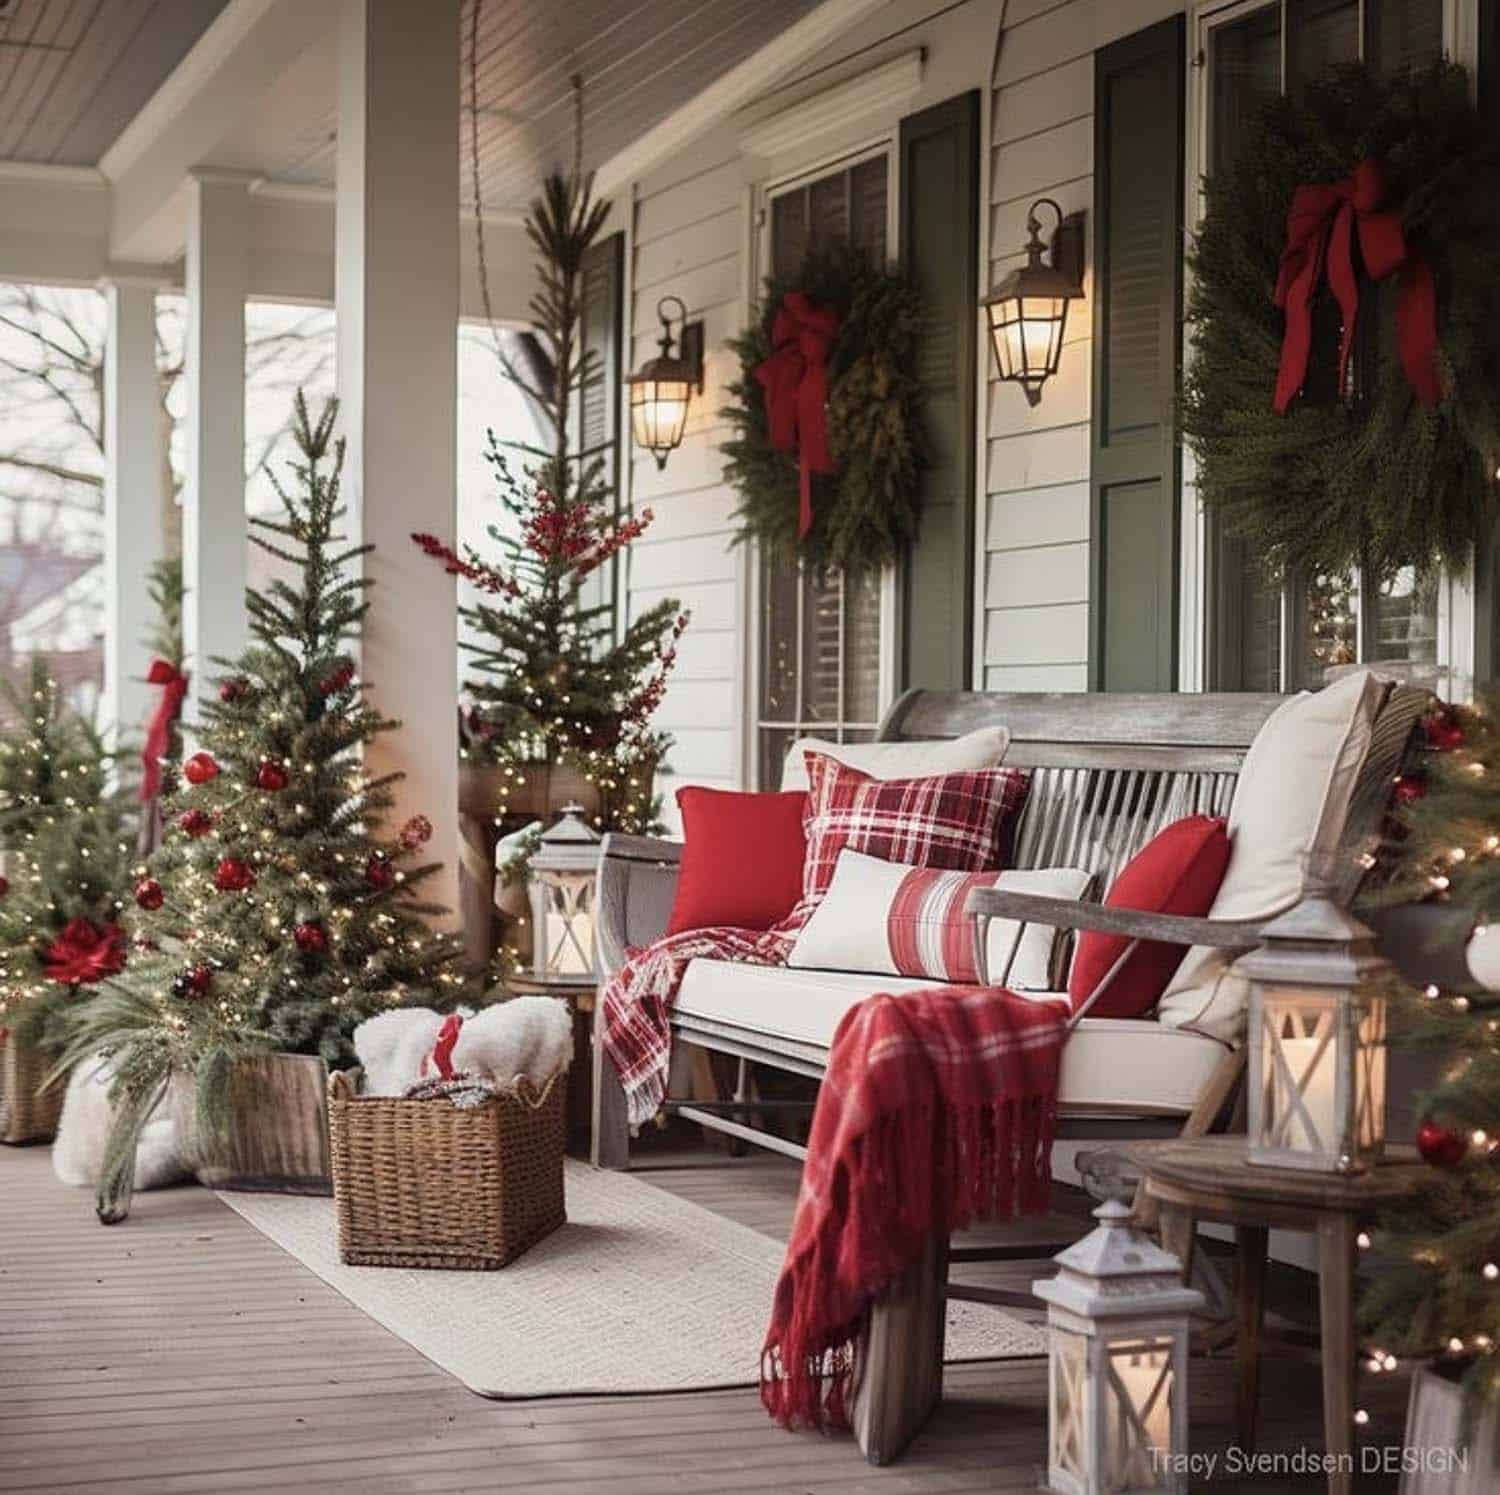 cozy and inviting front porch with wreaths, trees and lanterns